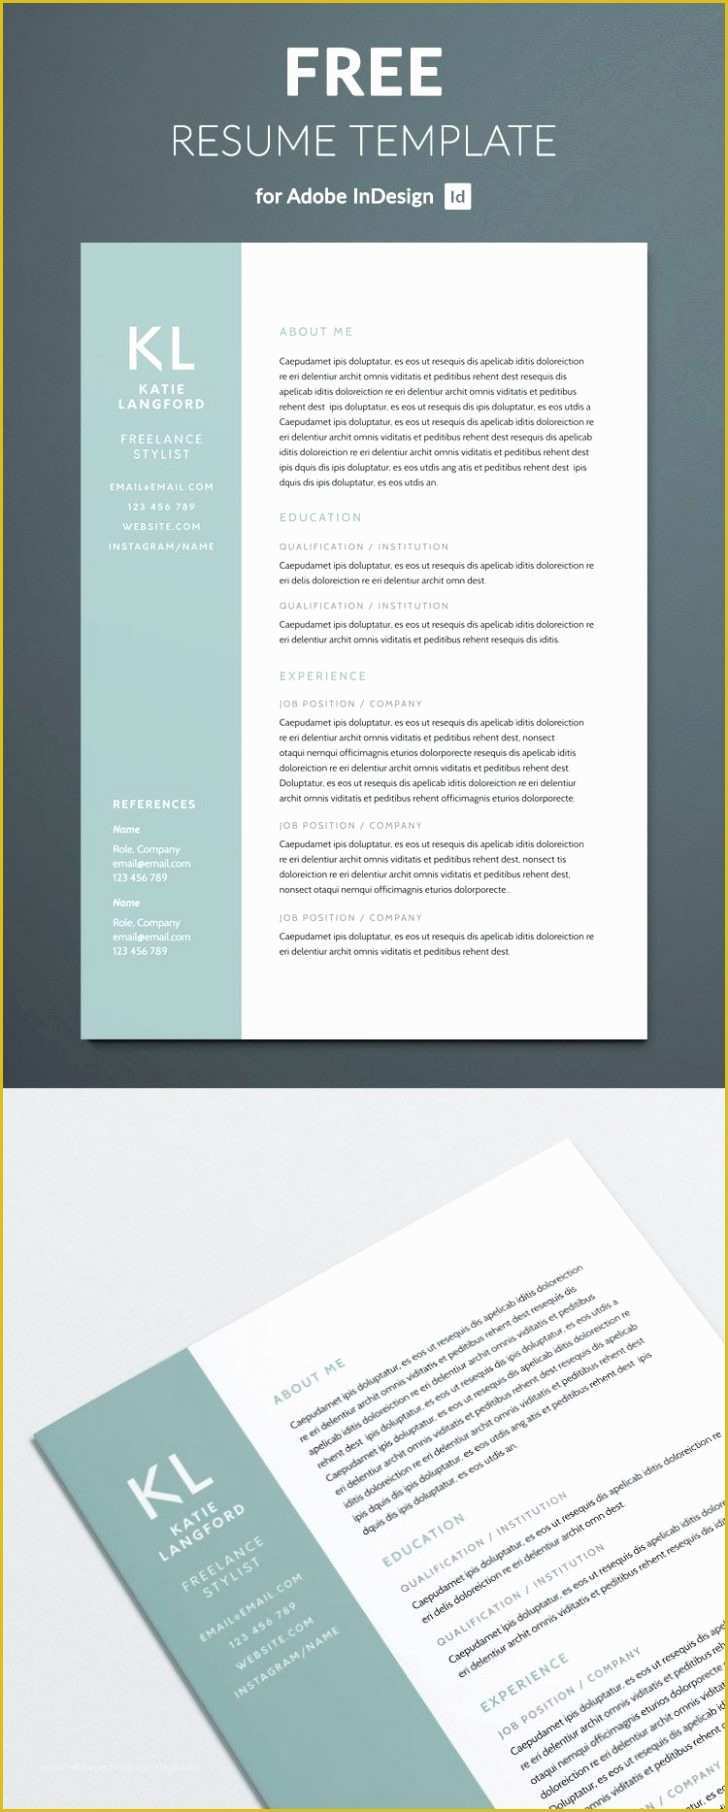 Indesign Resume Template Free Download Of Resume and Template Free Indesign Resume Template Free